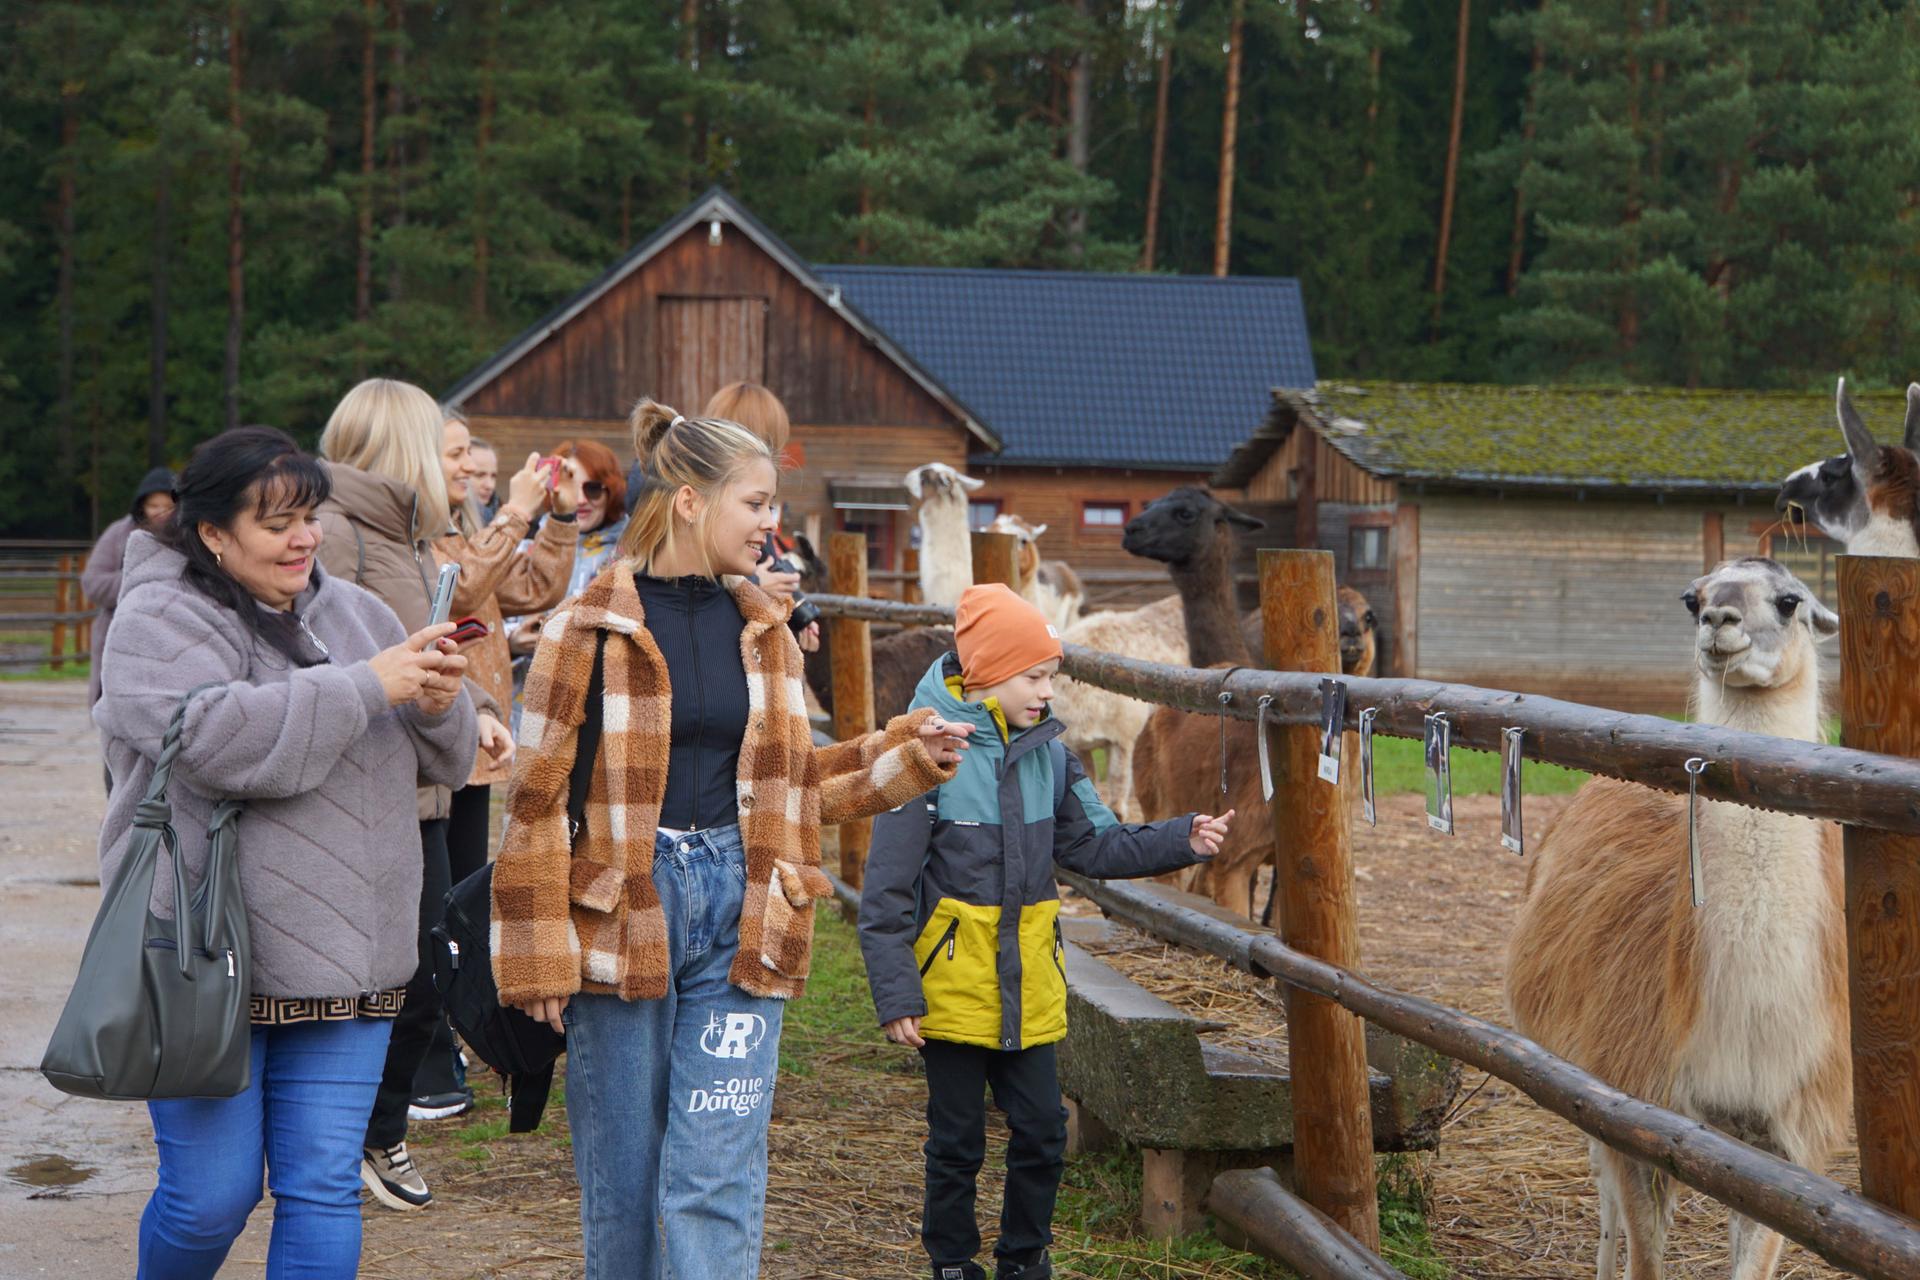 Ukrainian families spend the day at a petting zoo in Riga, the Latvian capital.